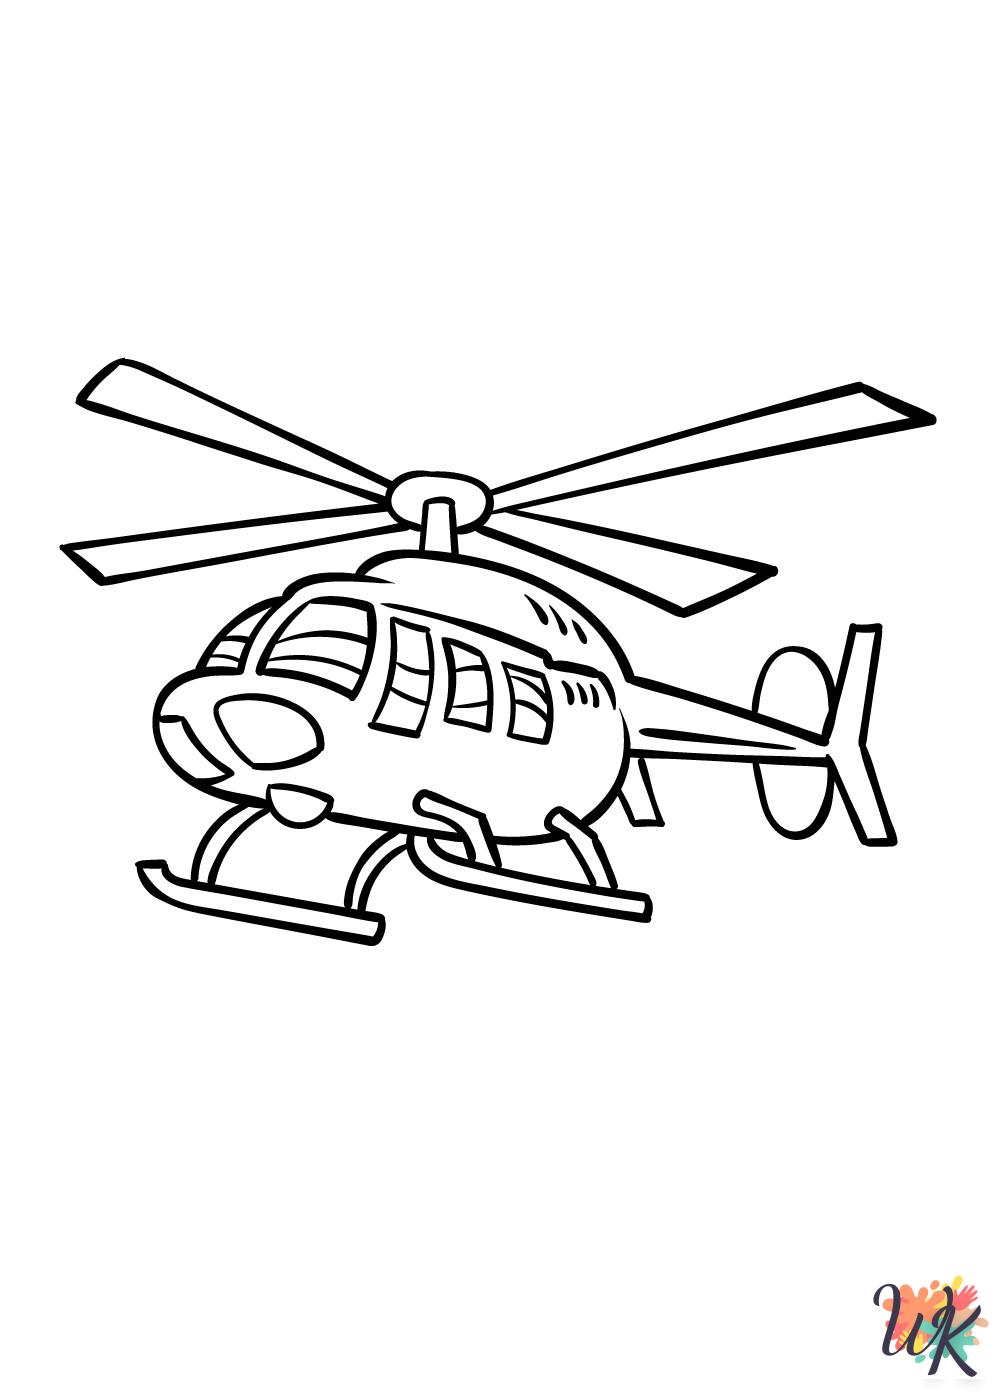 free full size printable Helicopter coloring pages for adults pdf